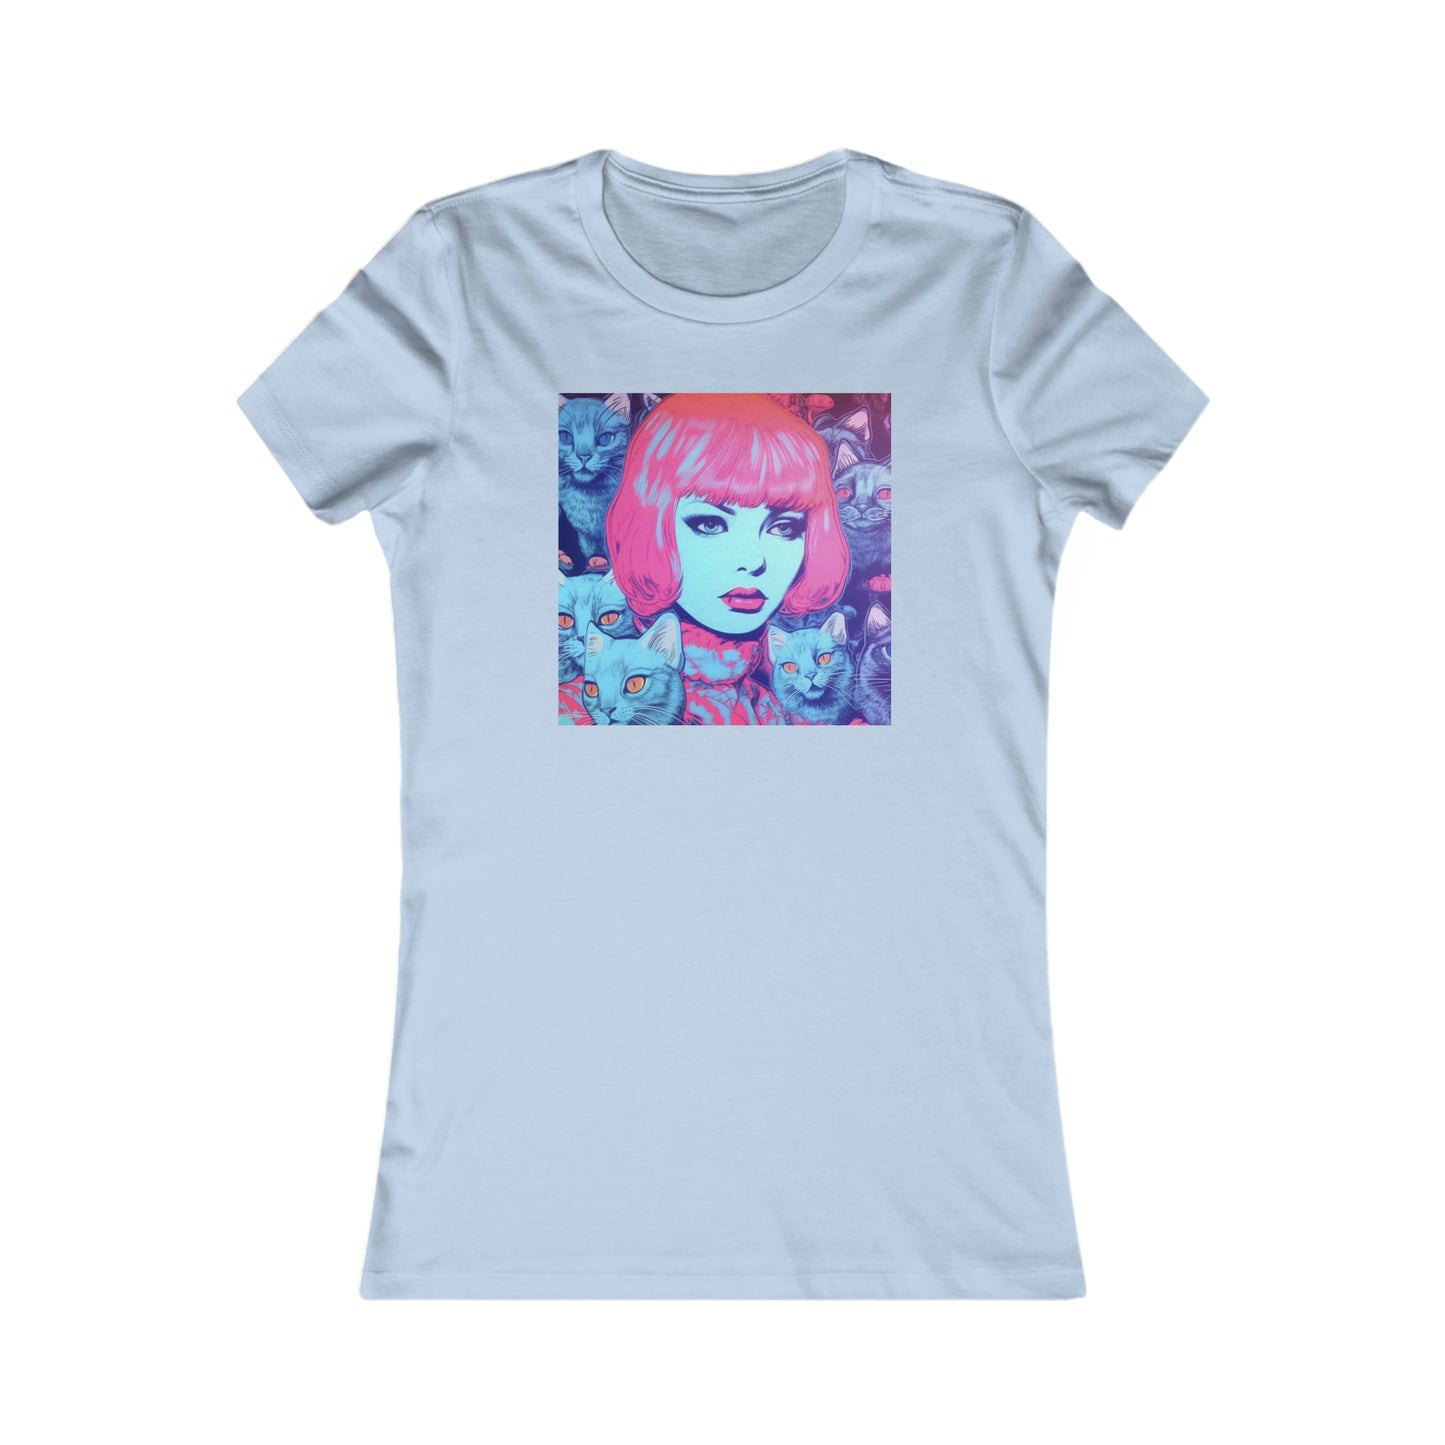 Cat Girl - Hurts Shirts Collection